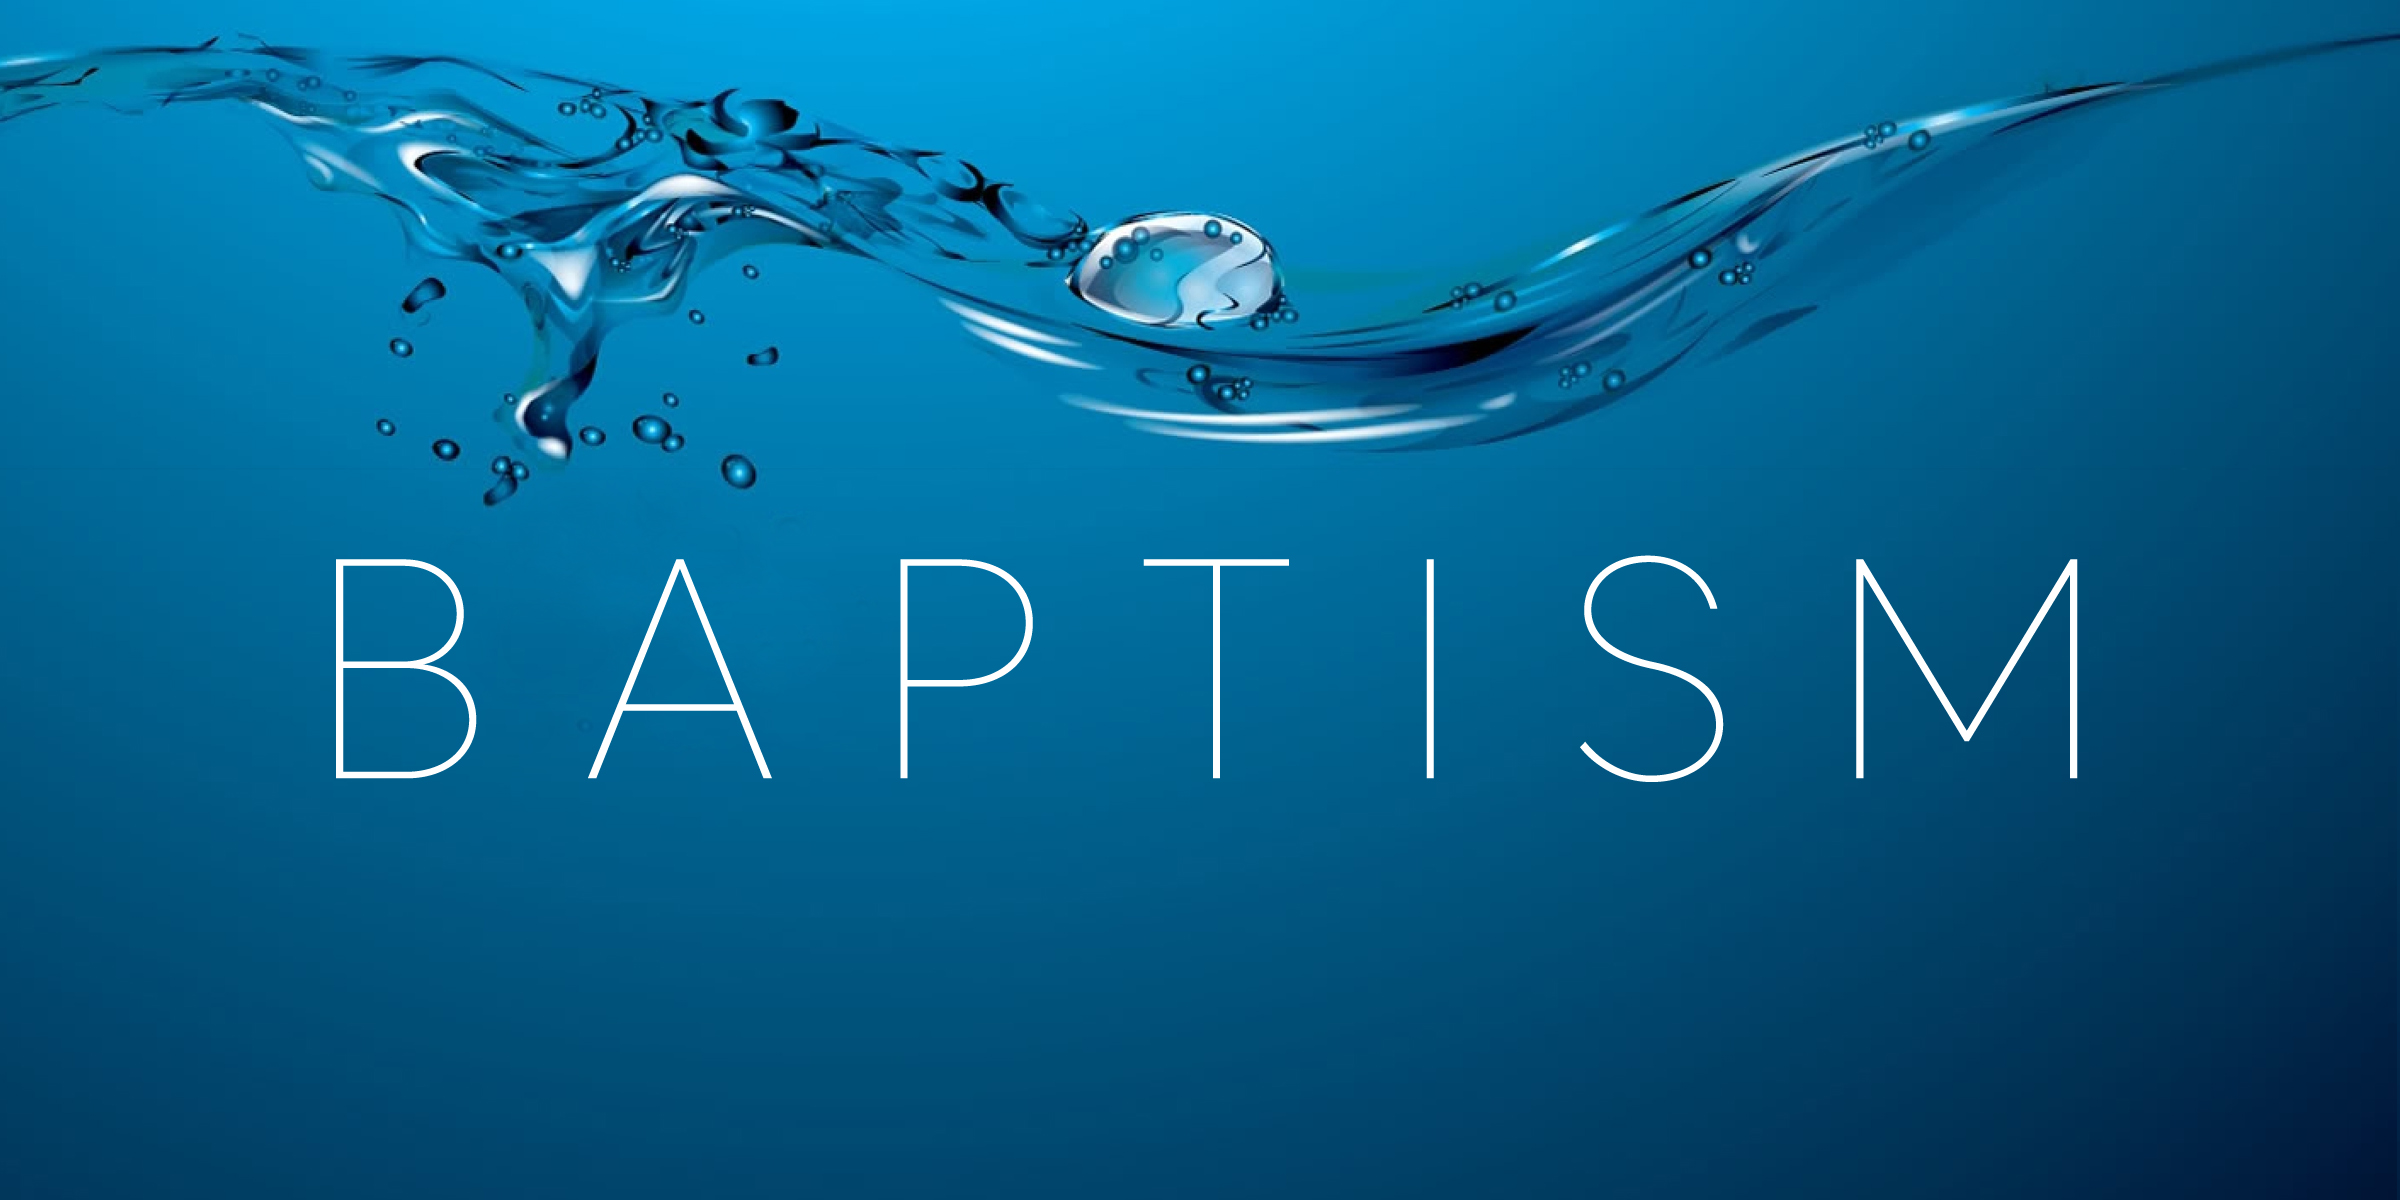 water baptism backgrounds